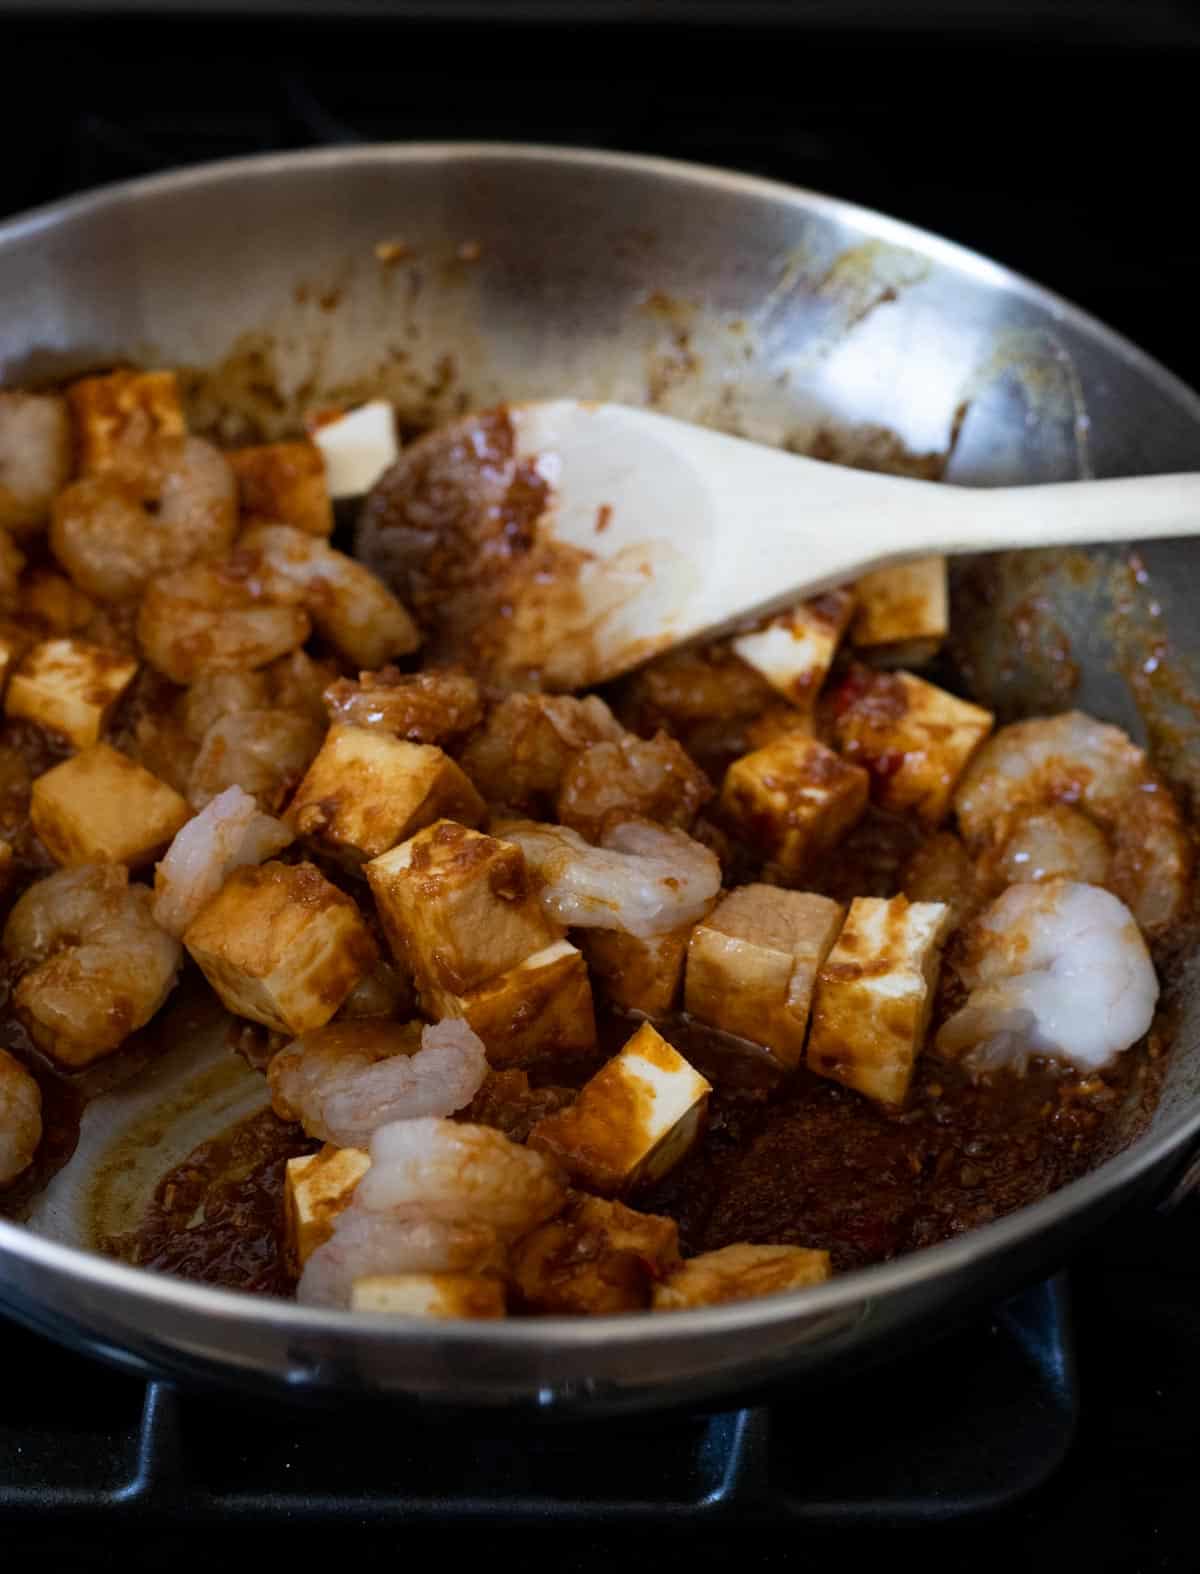 Tofu and shrimp added to the spice paste in the skillet.